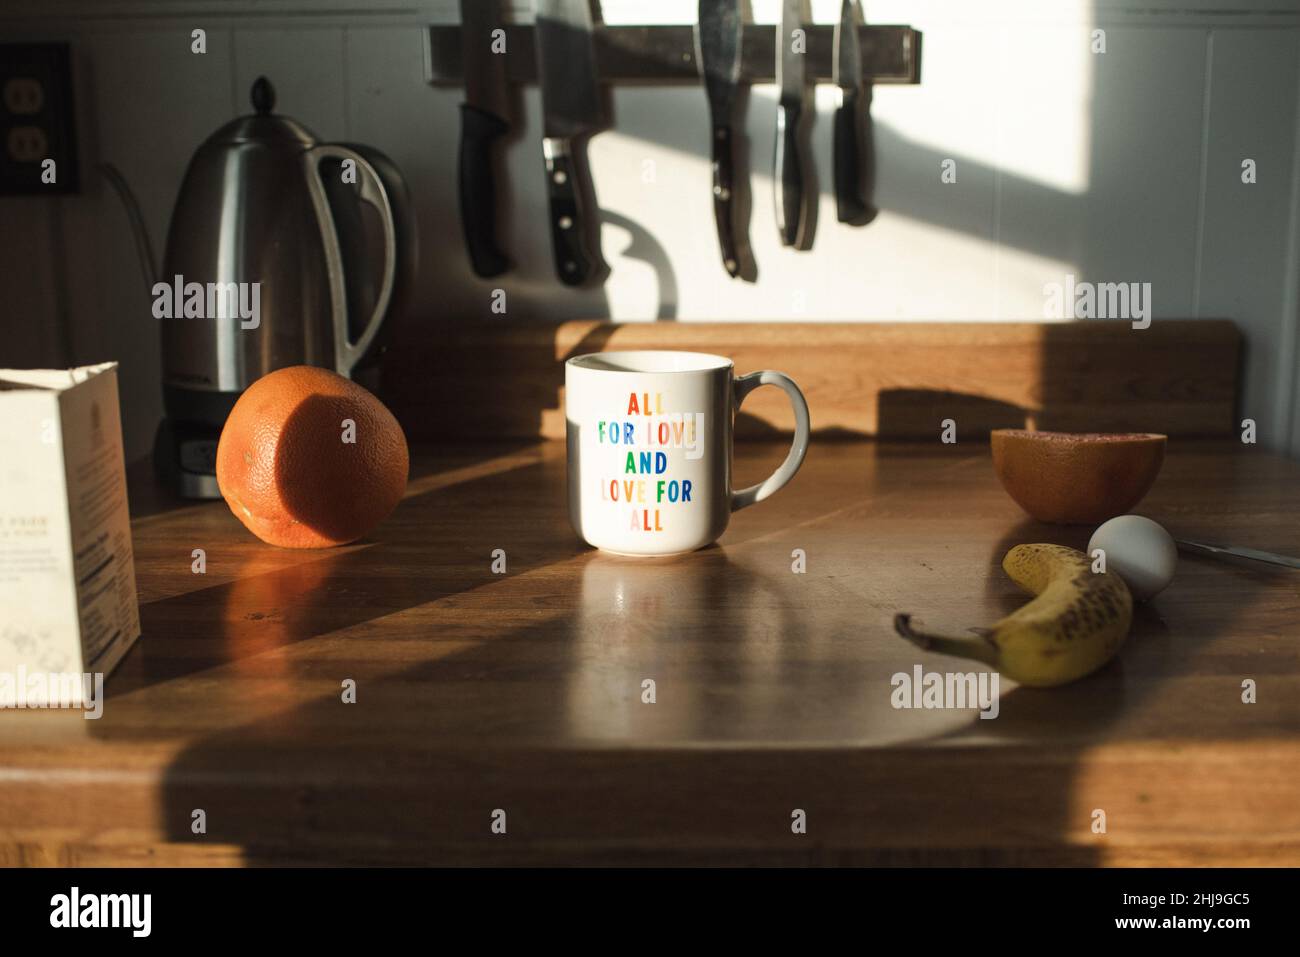 Cute All for Love and Love for All LGBTQ+ mug, rainbow mug, millenial hipster decor, countertop with breakfast foods in the morning light Stock Photo